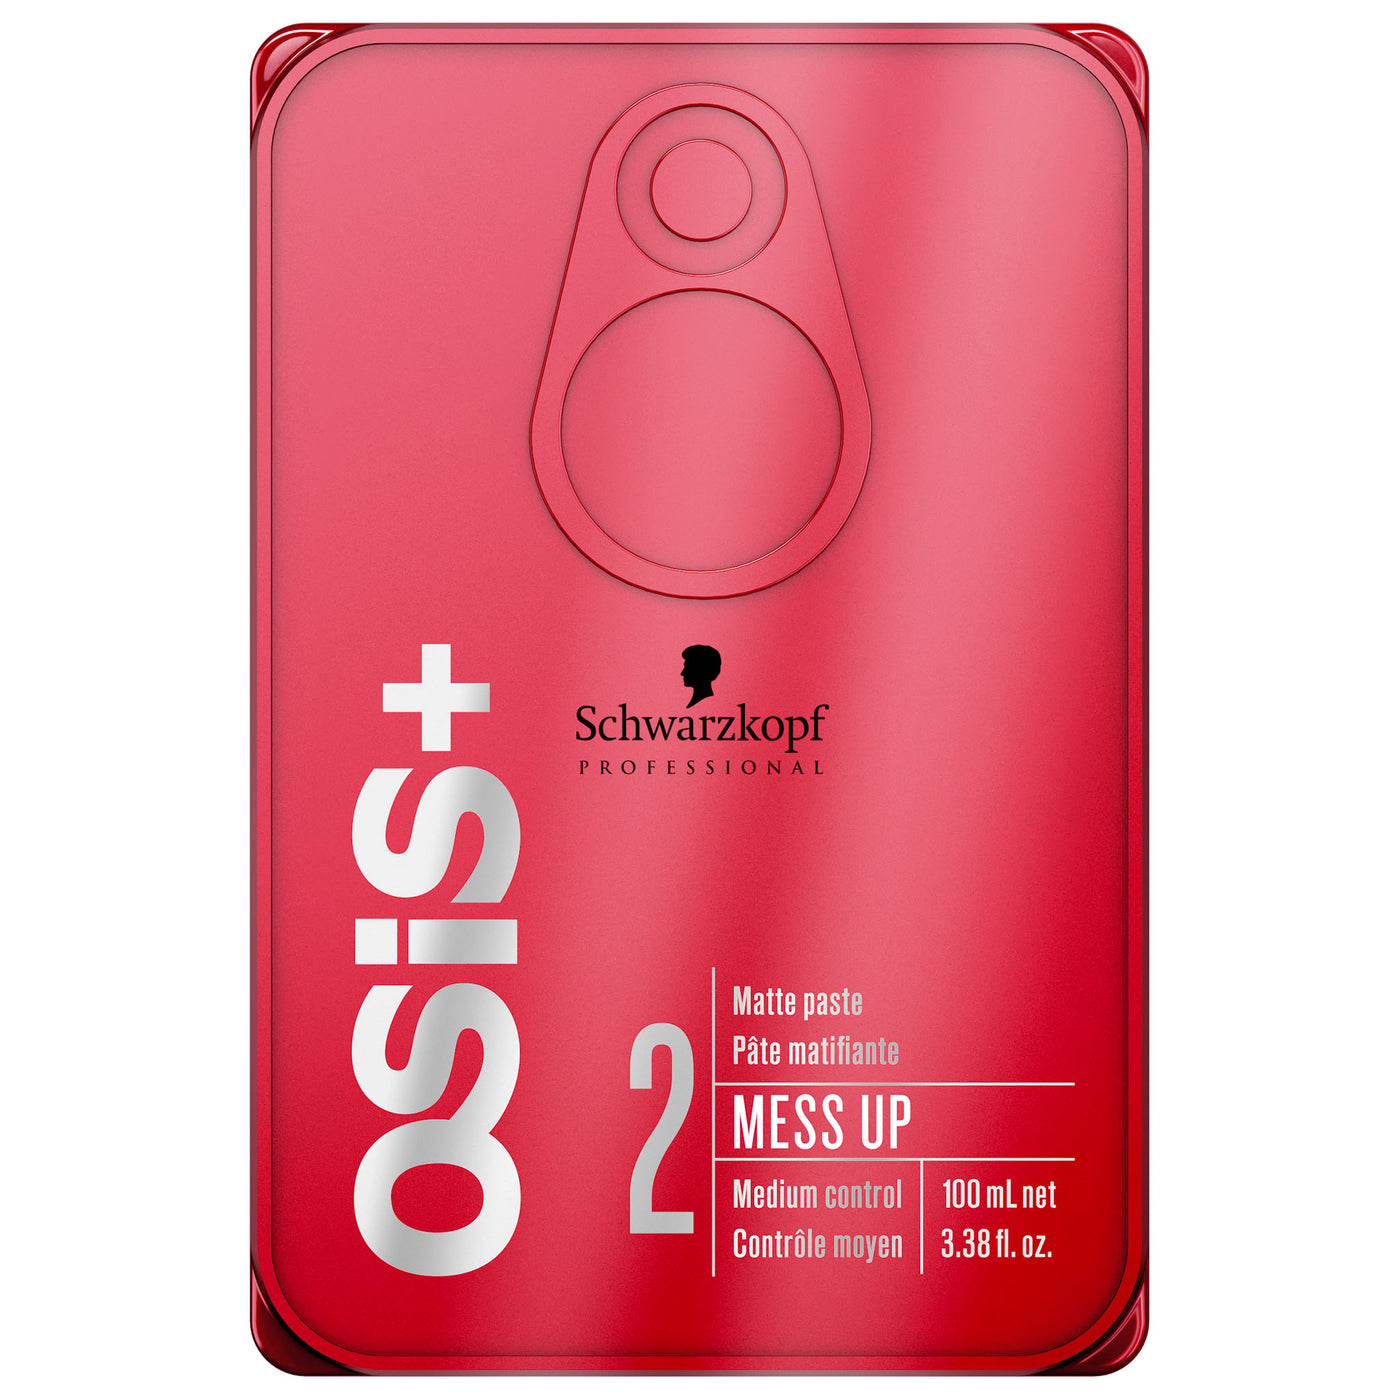 Schwarzkopf Professional OSiS+ Mess Up - Matte Paste For Messy Styles 100ml